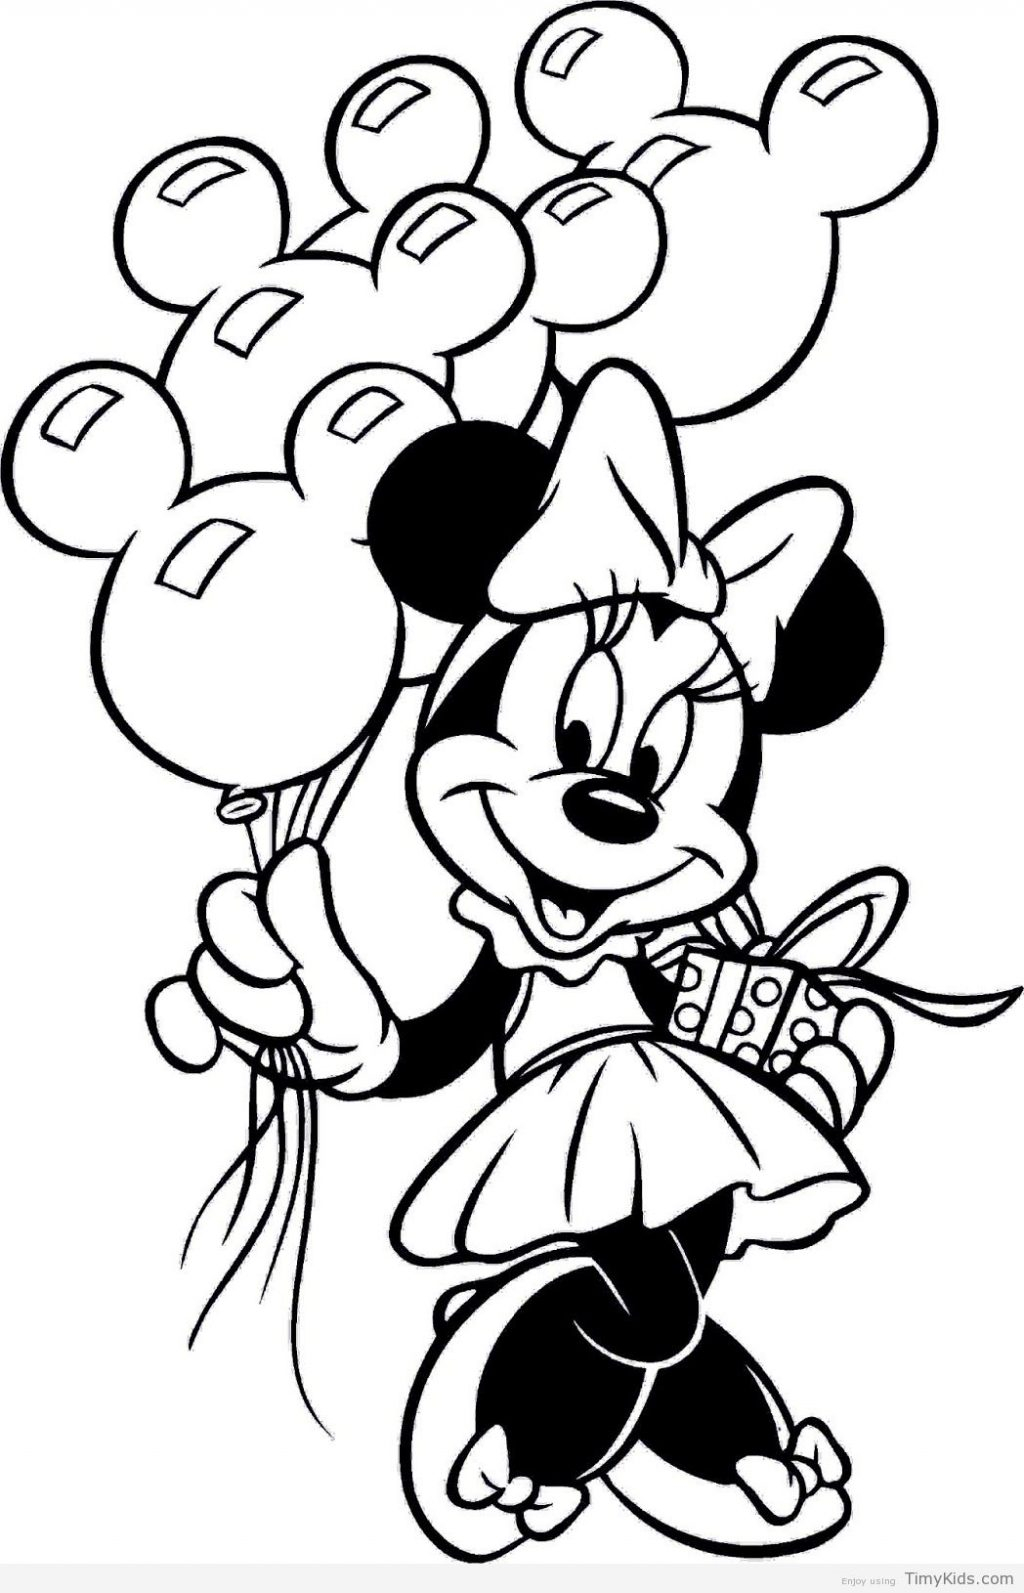 Free Baby Minnie Mouse Coloring Pages Coloring Books Pin Julia On Colorings Princess Coloring Pages